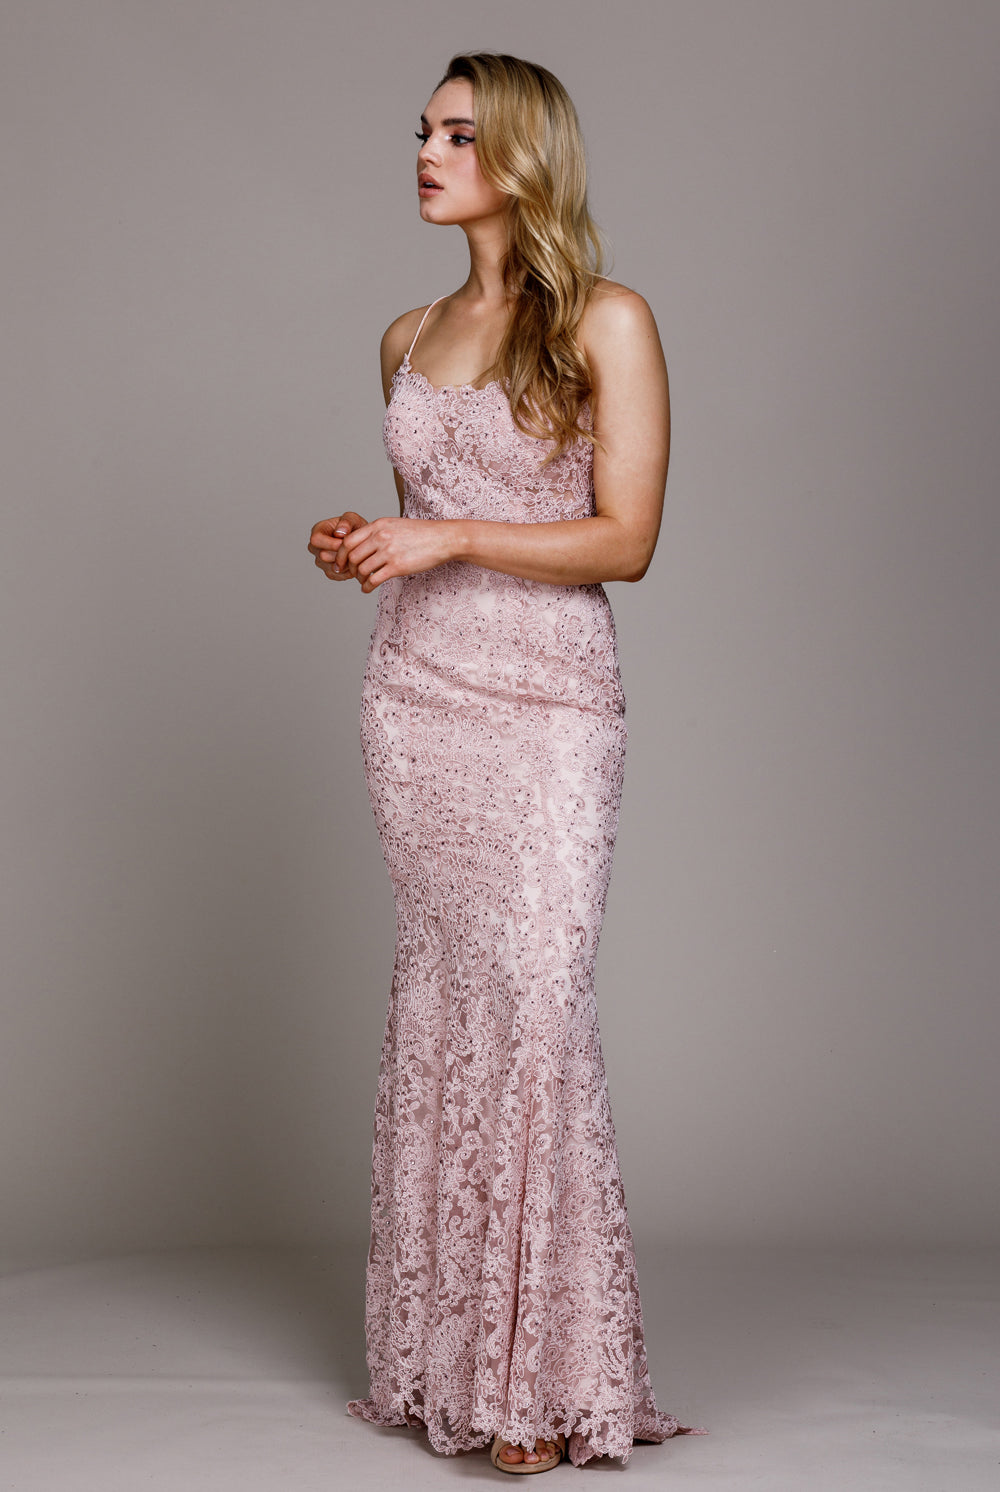 Embroidered Lace Mermaid Long Prom & Evening Dress ACR015-Prom Dress-smcfashion.com